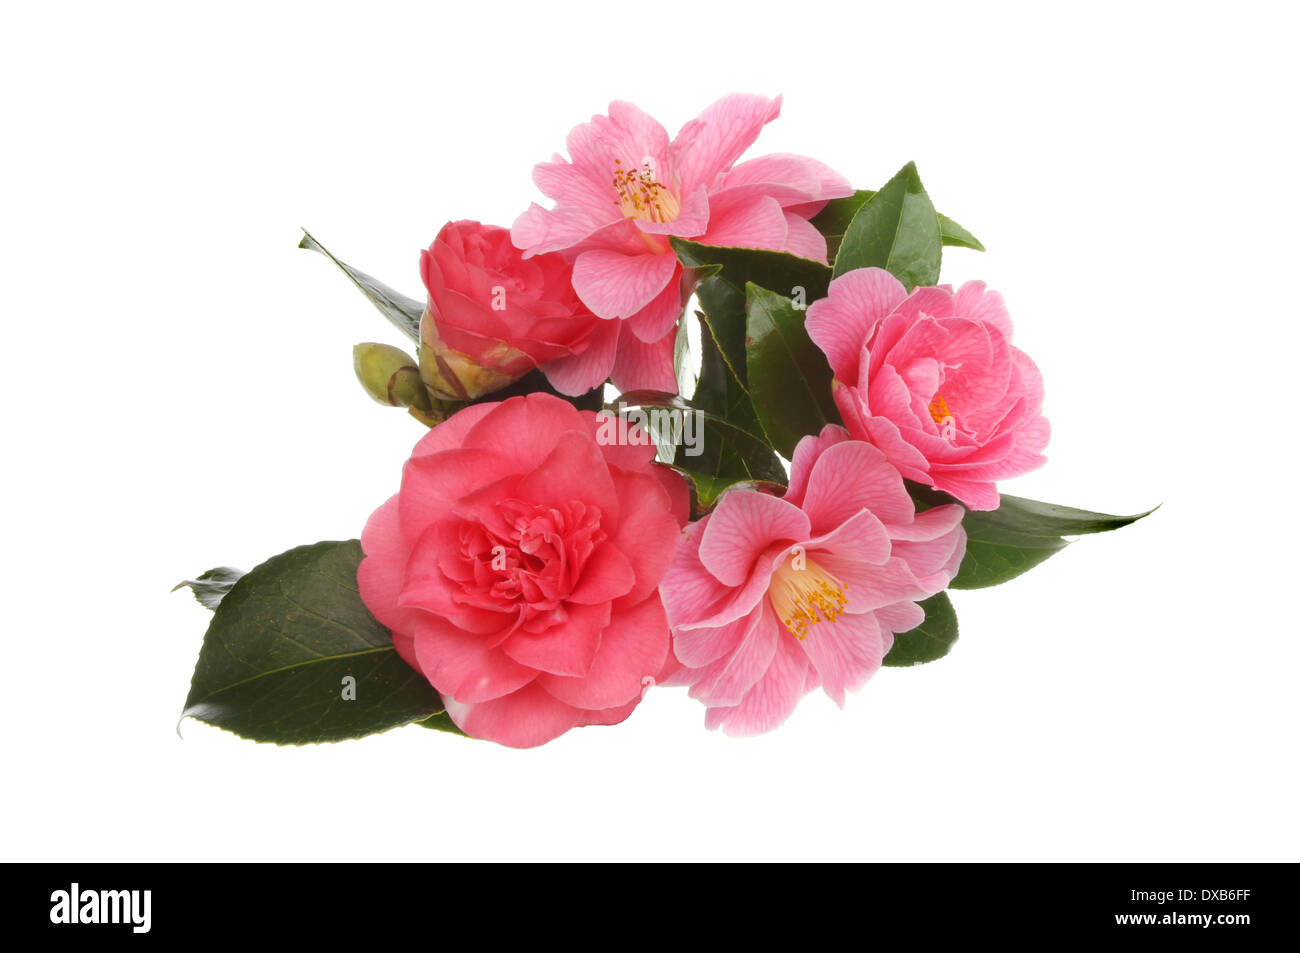 Arrangement of camellia flowers isolated against white Stock Photo